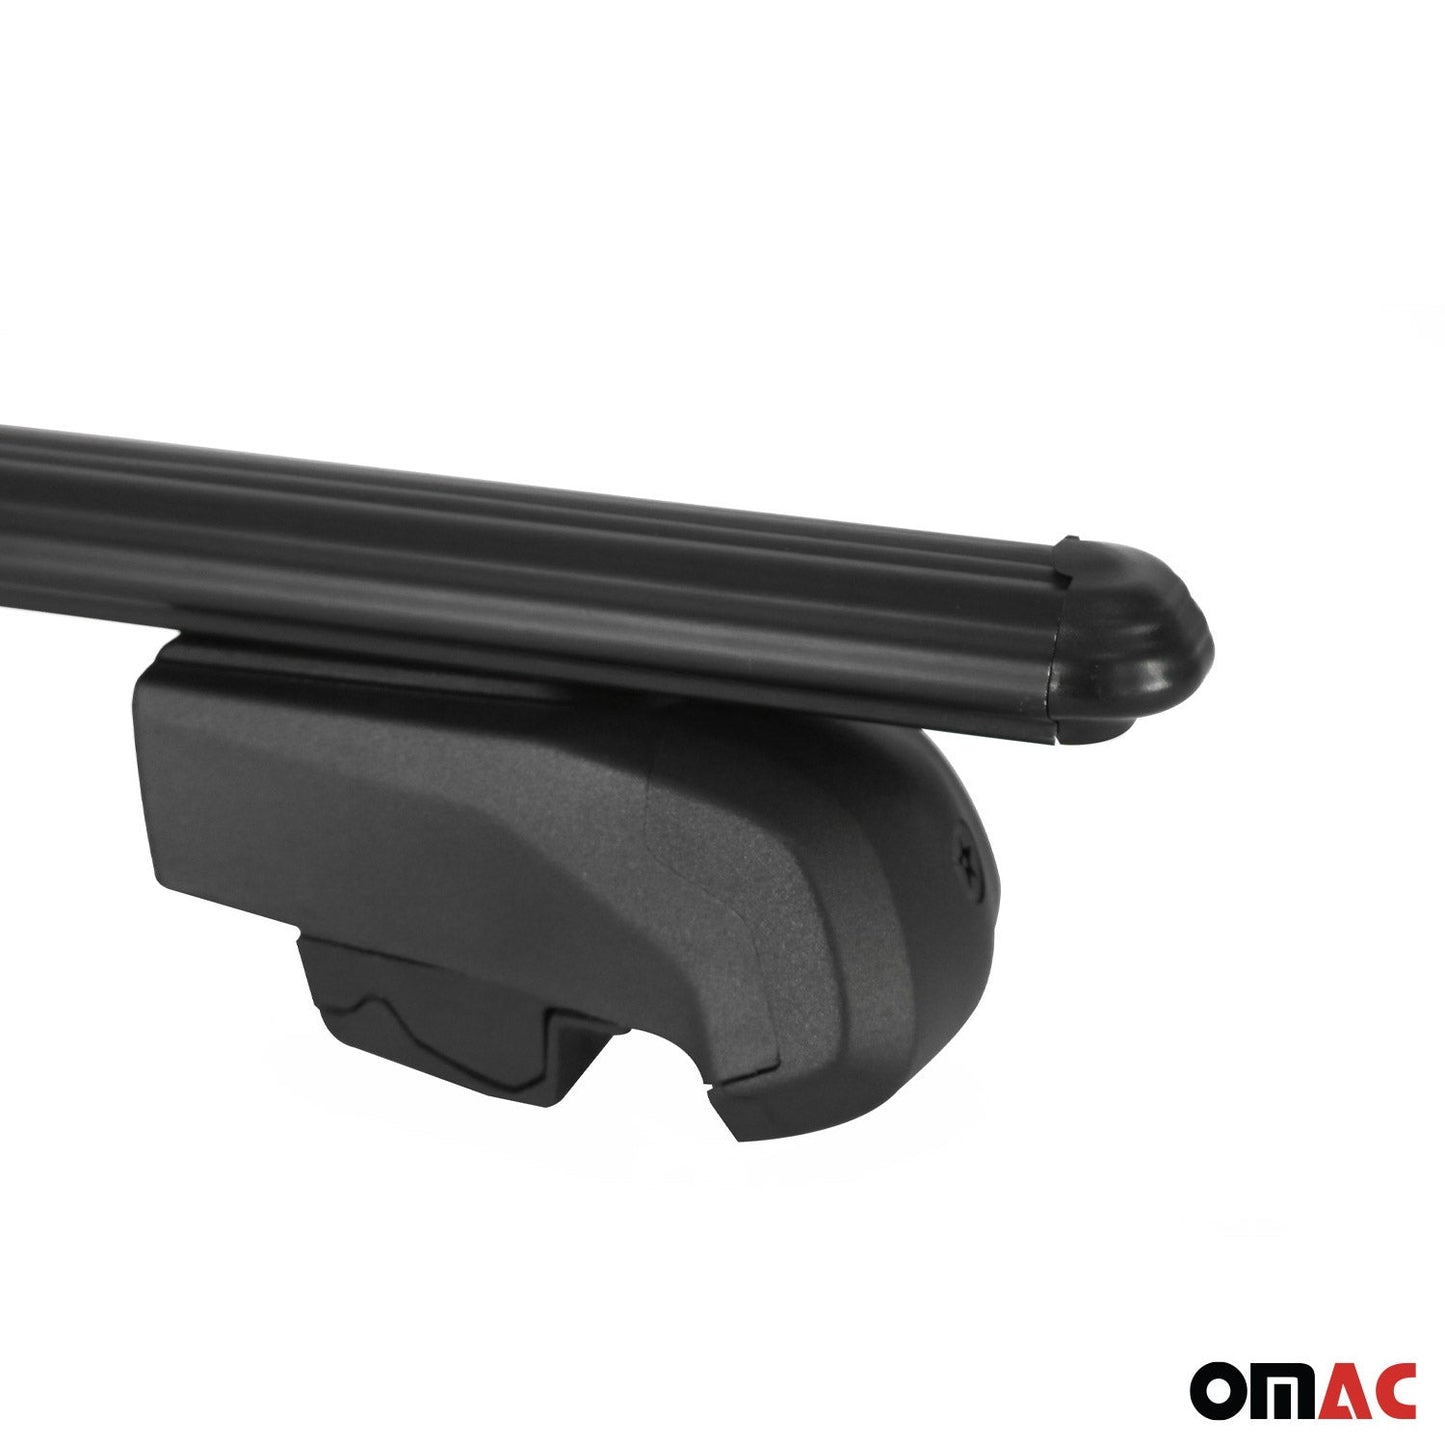 OMAC Lockable Roof Rack Cross Bars Luggage Carrier for Lincoln MKC 2015-2019 Black G003010